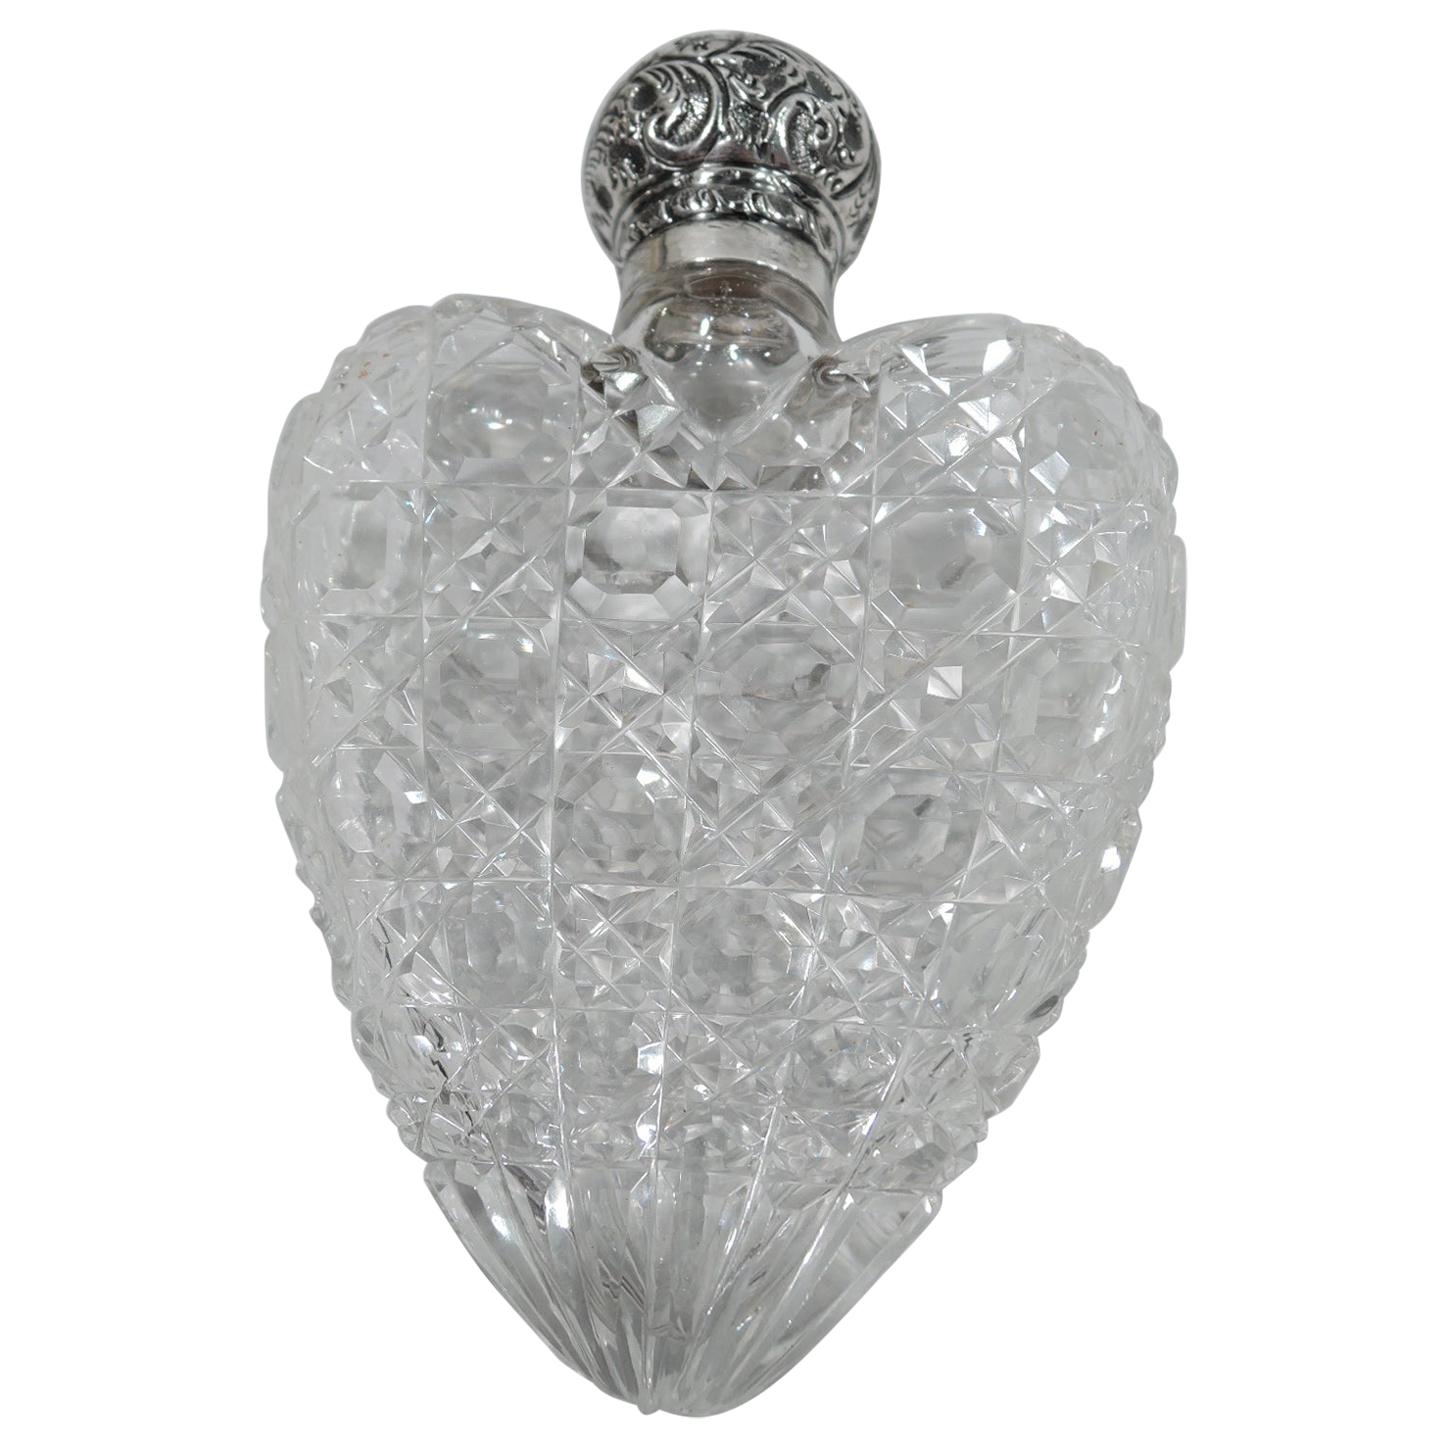 Antique English Victorian Sterling Silver and Cut-Glass Heart Flask